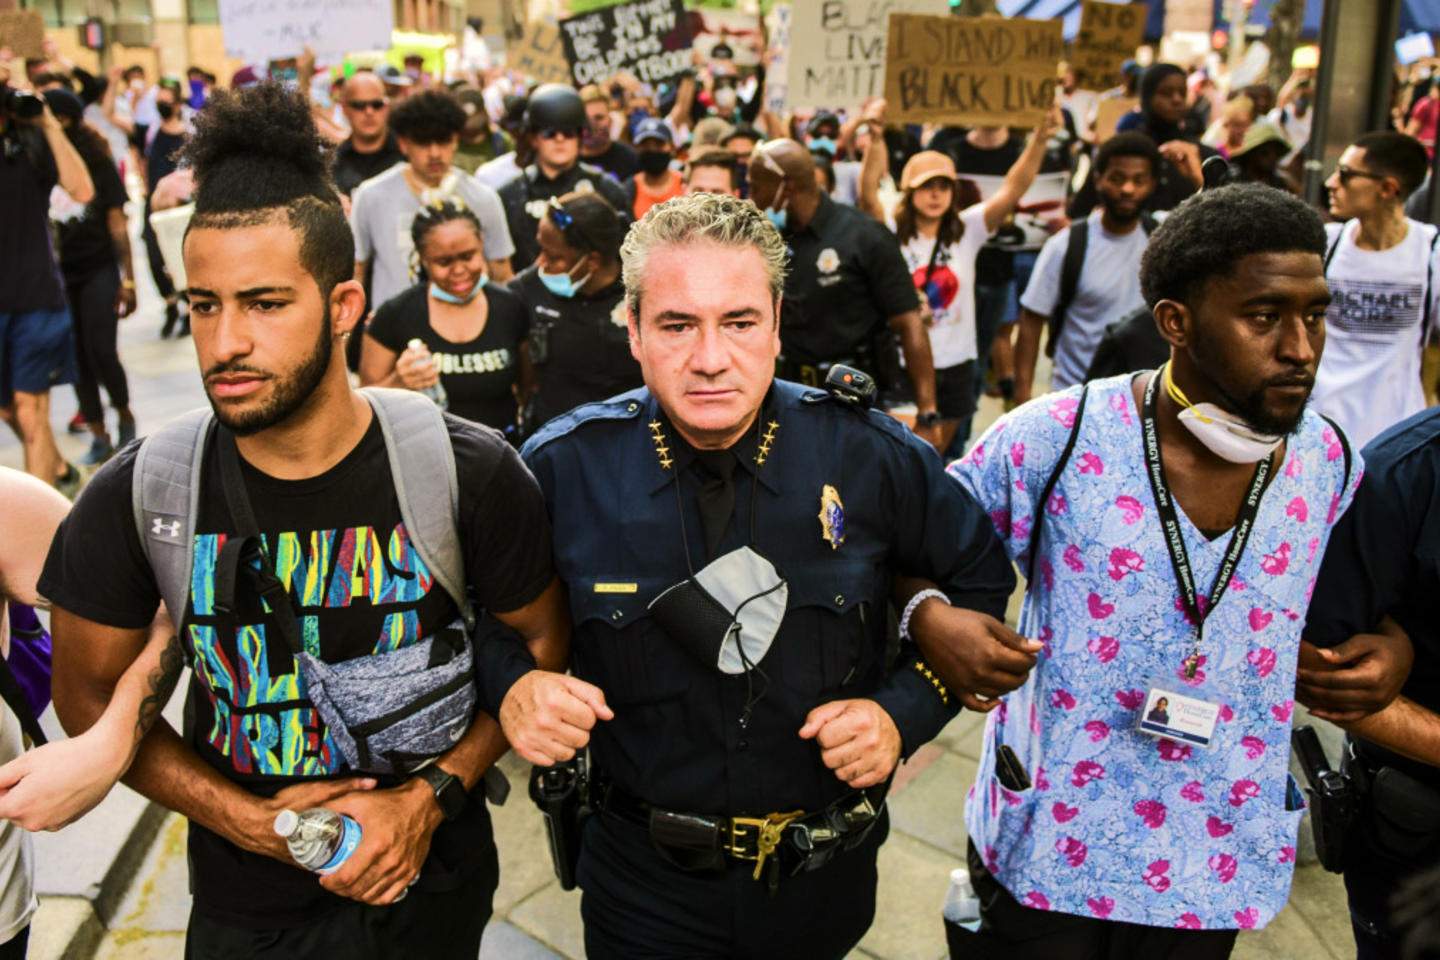 A protest where a police officer is linked arm in arm with someone in scrubs